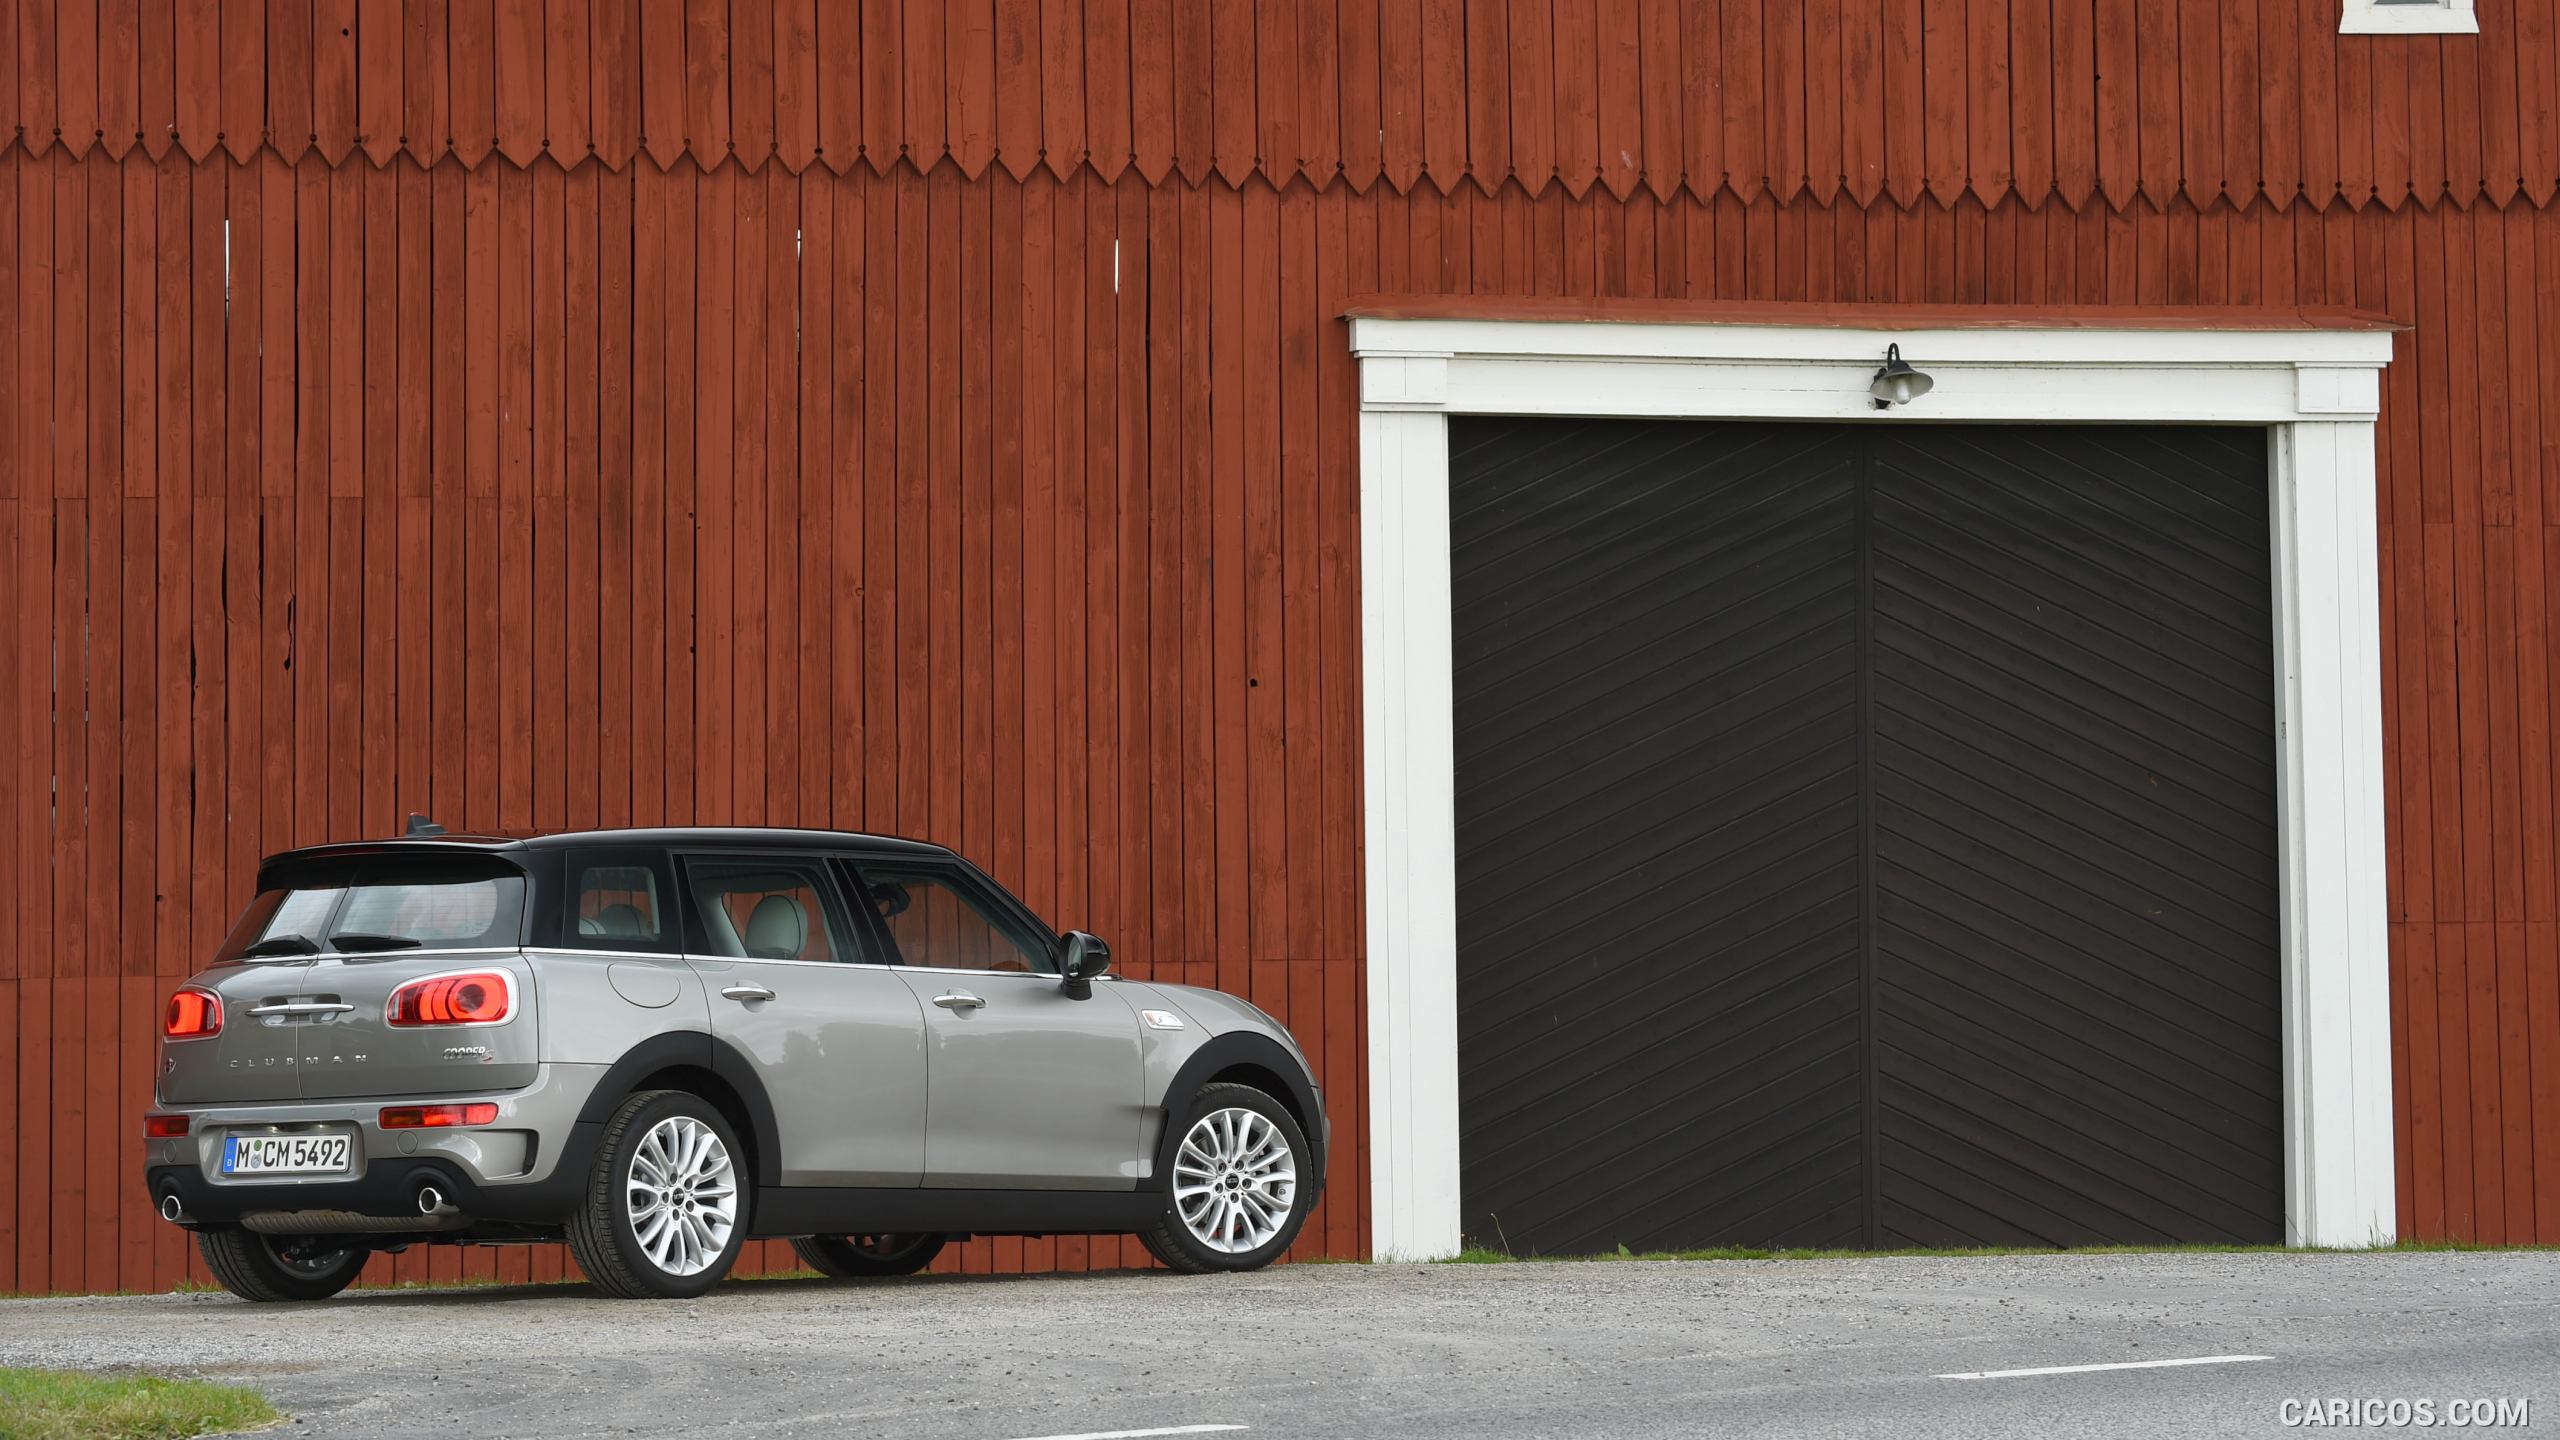 2016 MINI Cooper S Clubman in Metallic Melting Silver - Side, #196 of 380